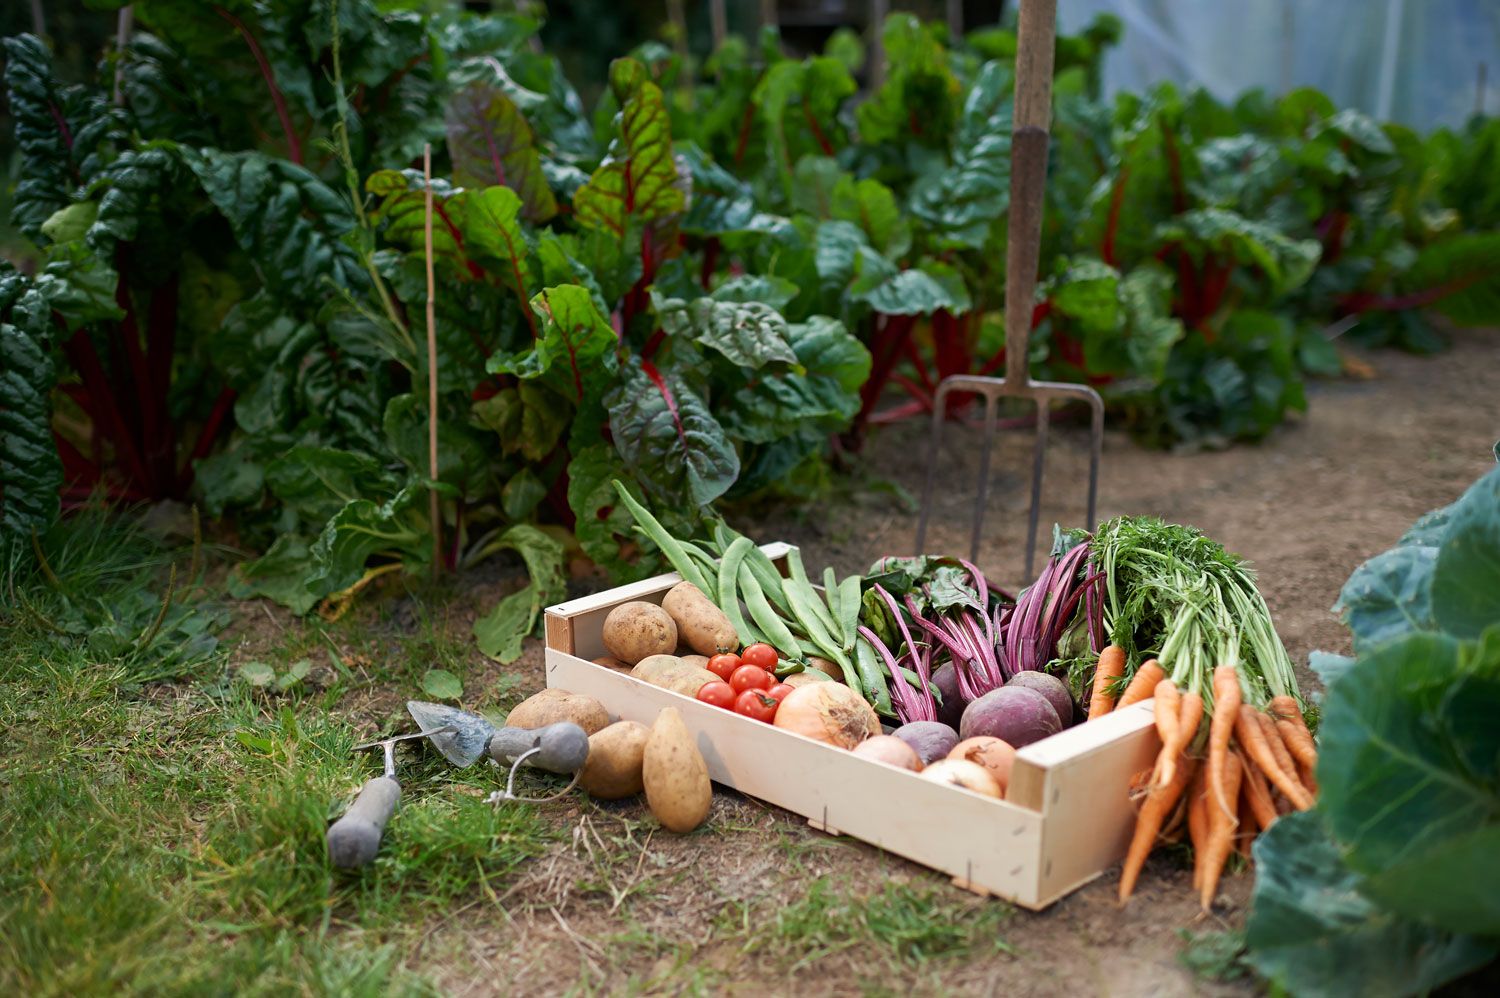 A wooden box filled with freshly picked vegetables from the garden.